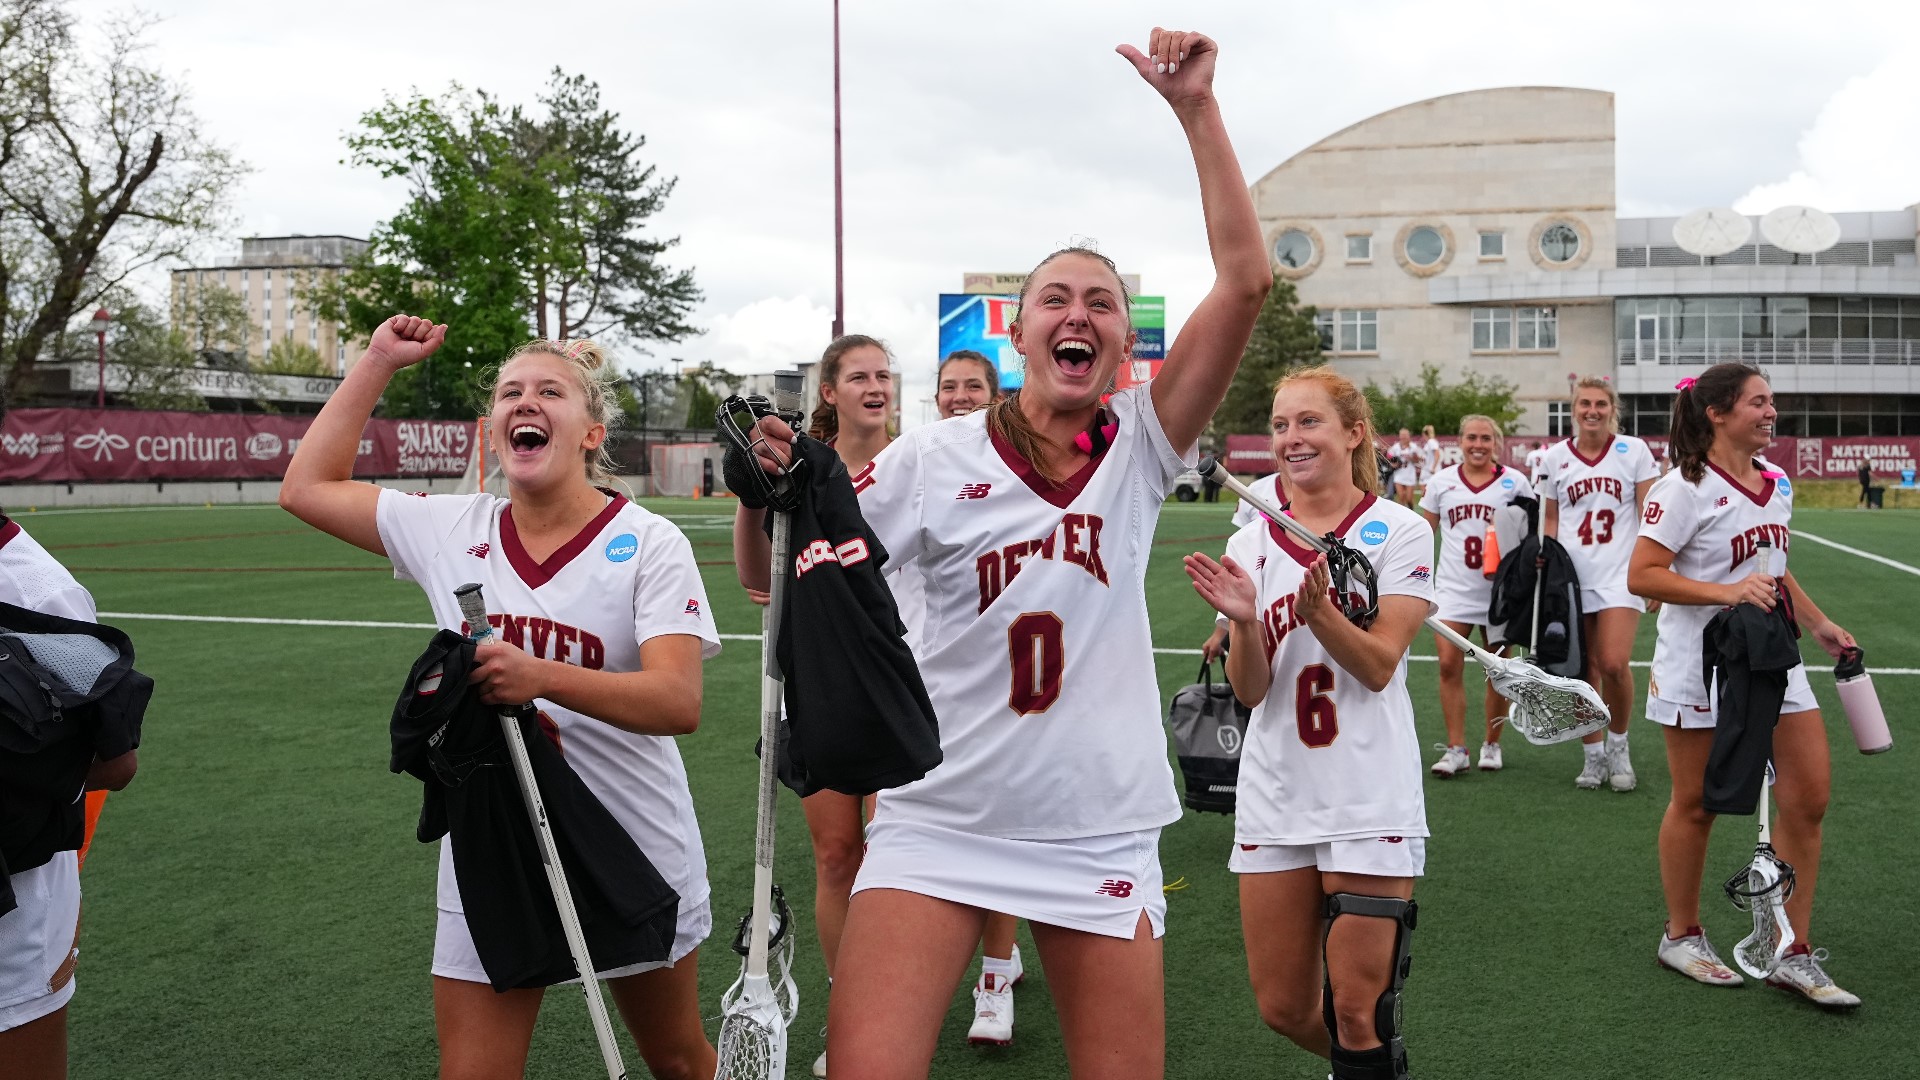 The perfect Pios are set to face 4-seed North Carolina in Chapel Hill on Thursday in the quarterfinals.